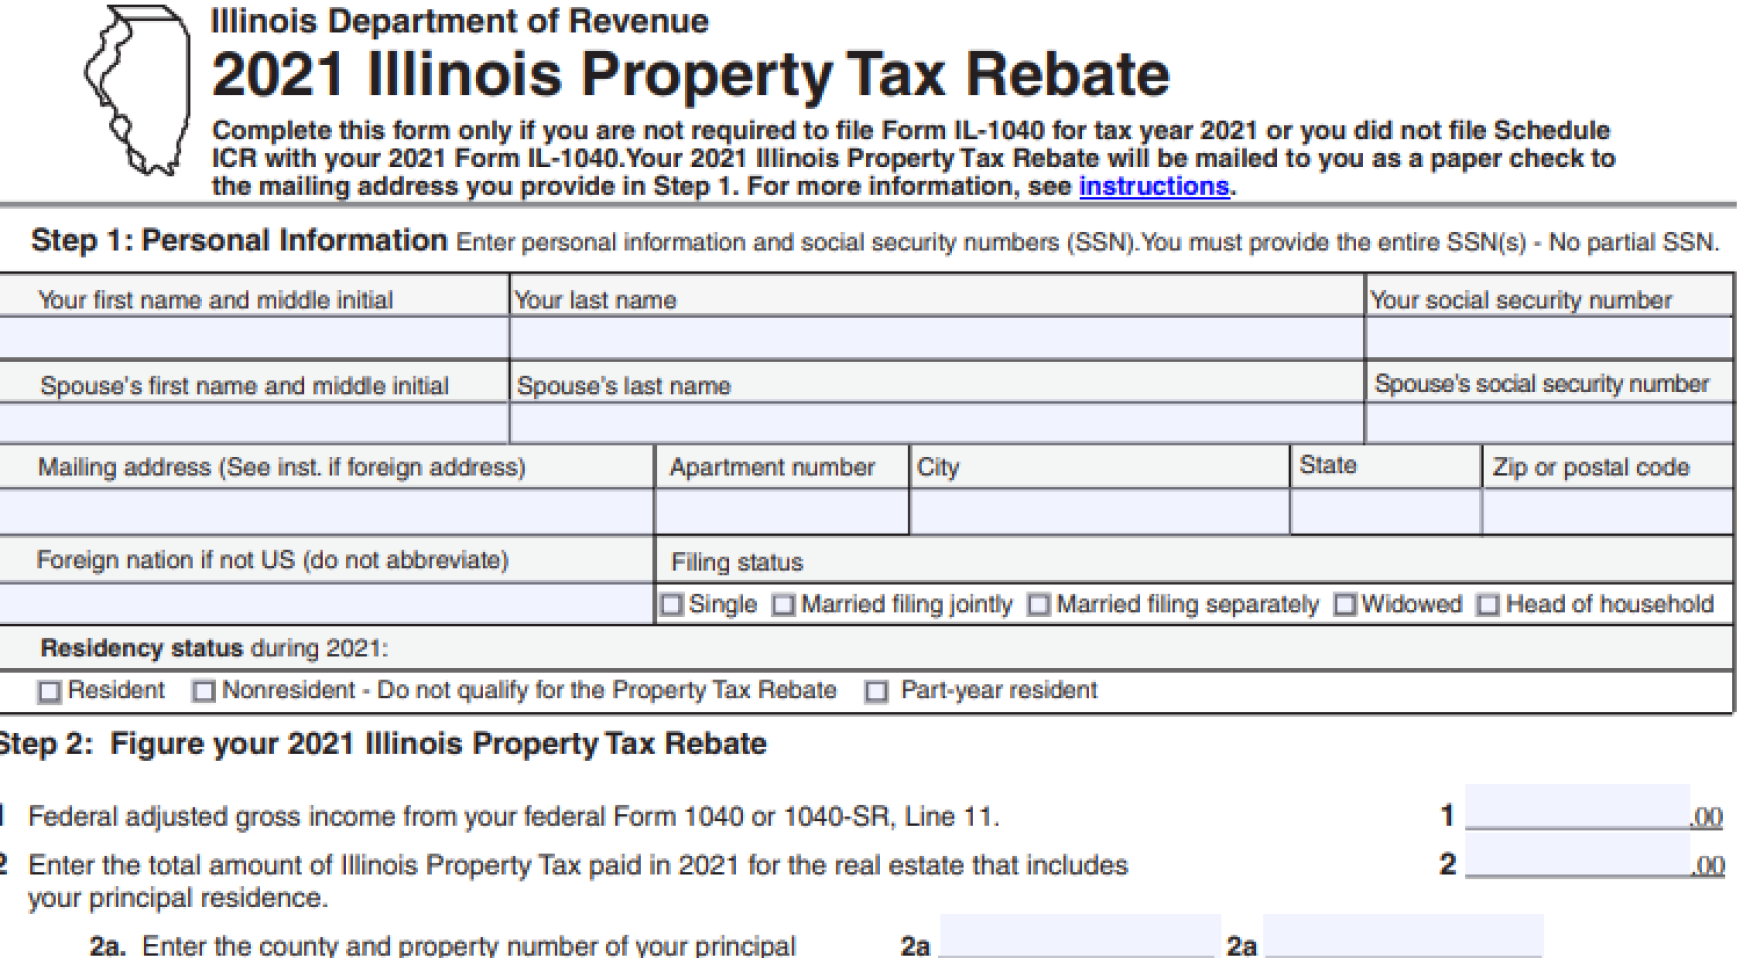 Retirees Need To Take Action For Latest Property Tax Rebate NPR Illinois